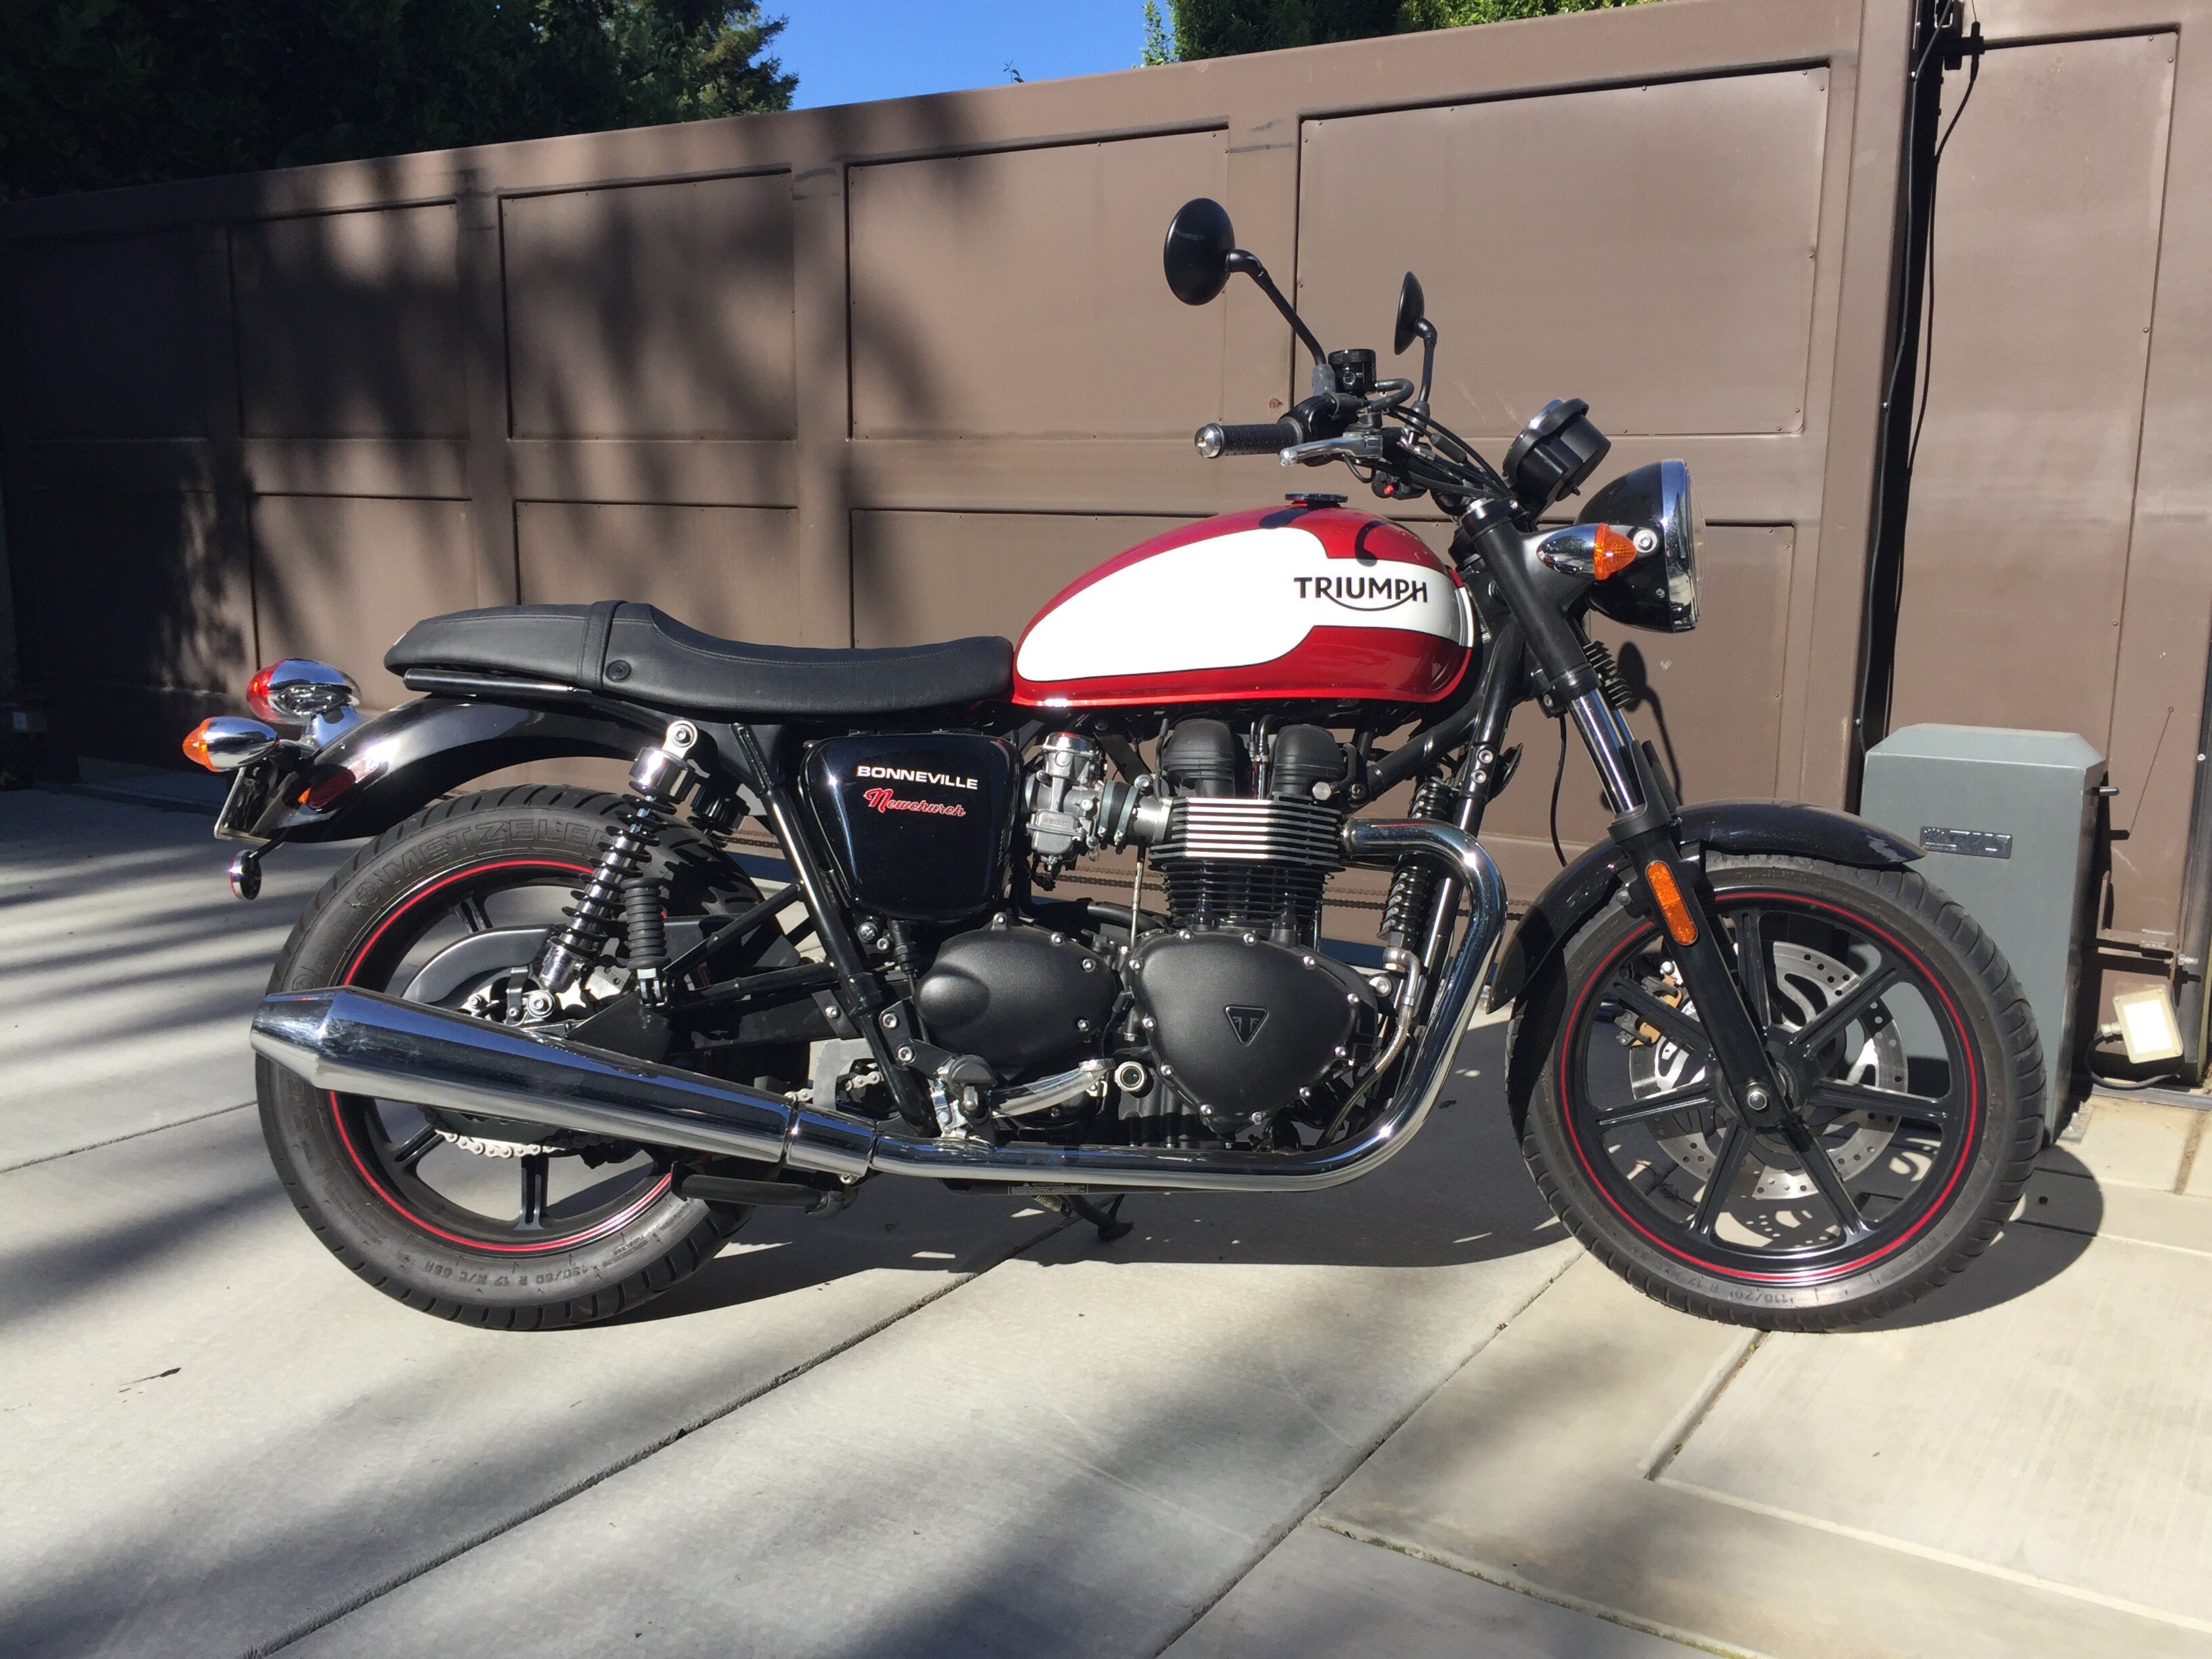 2015 Triumph Bonneville 900 Motorcycles For Sale Motorcycles On Autotrader